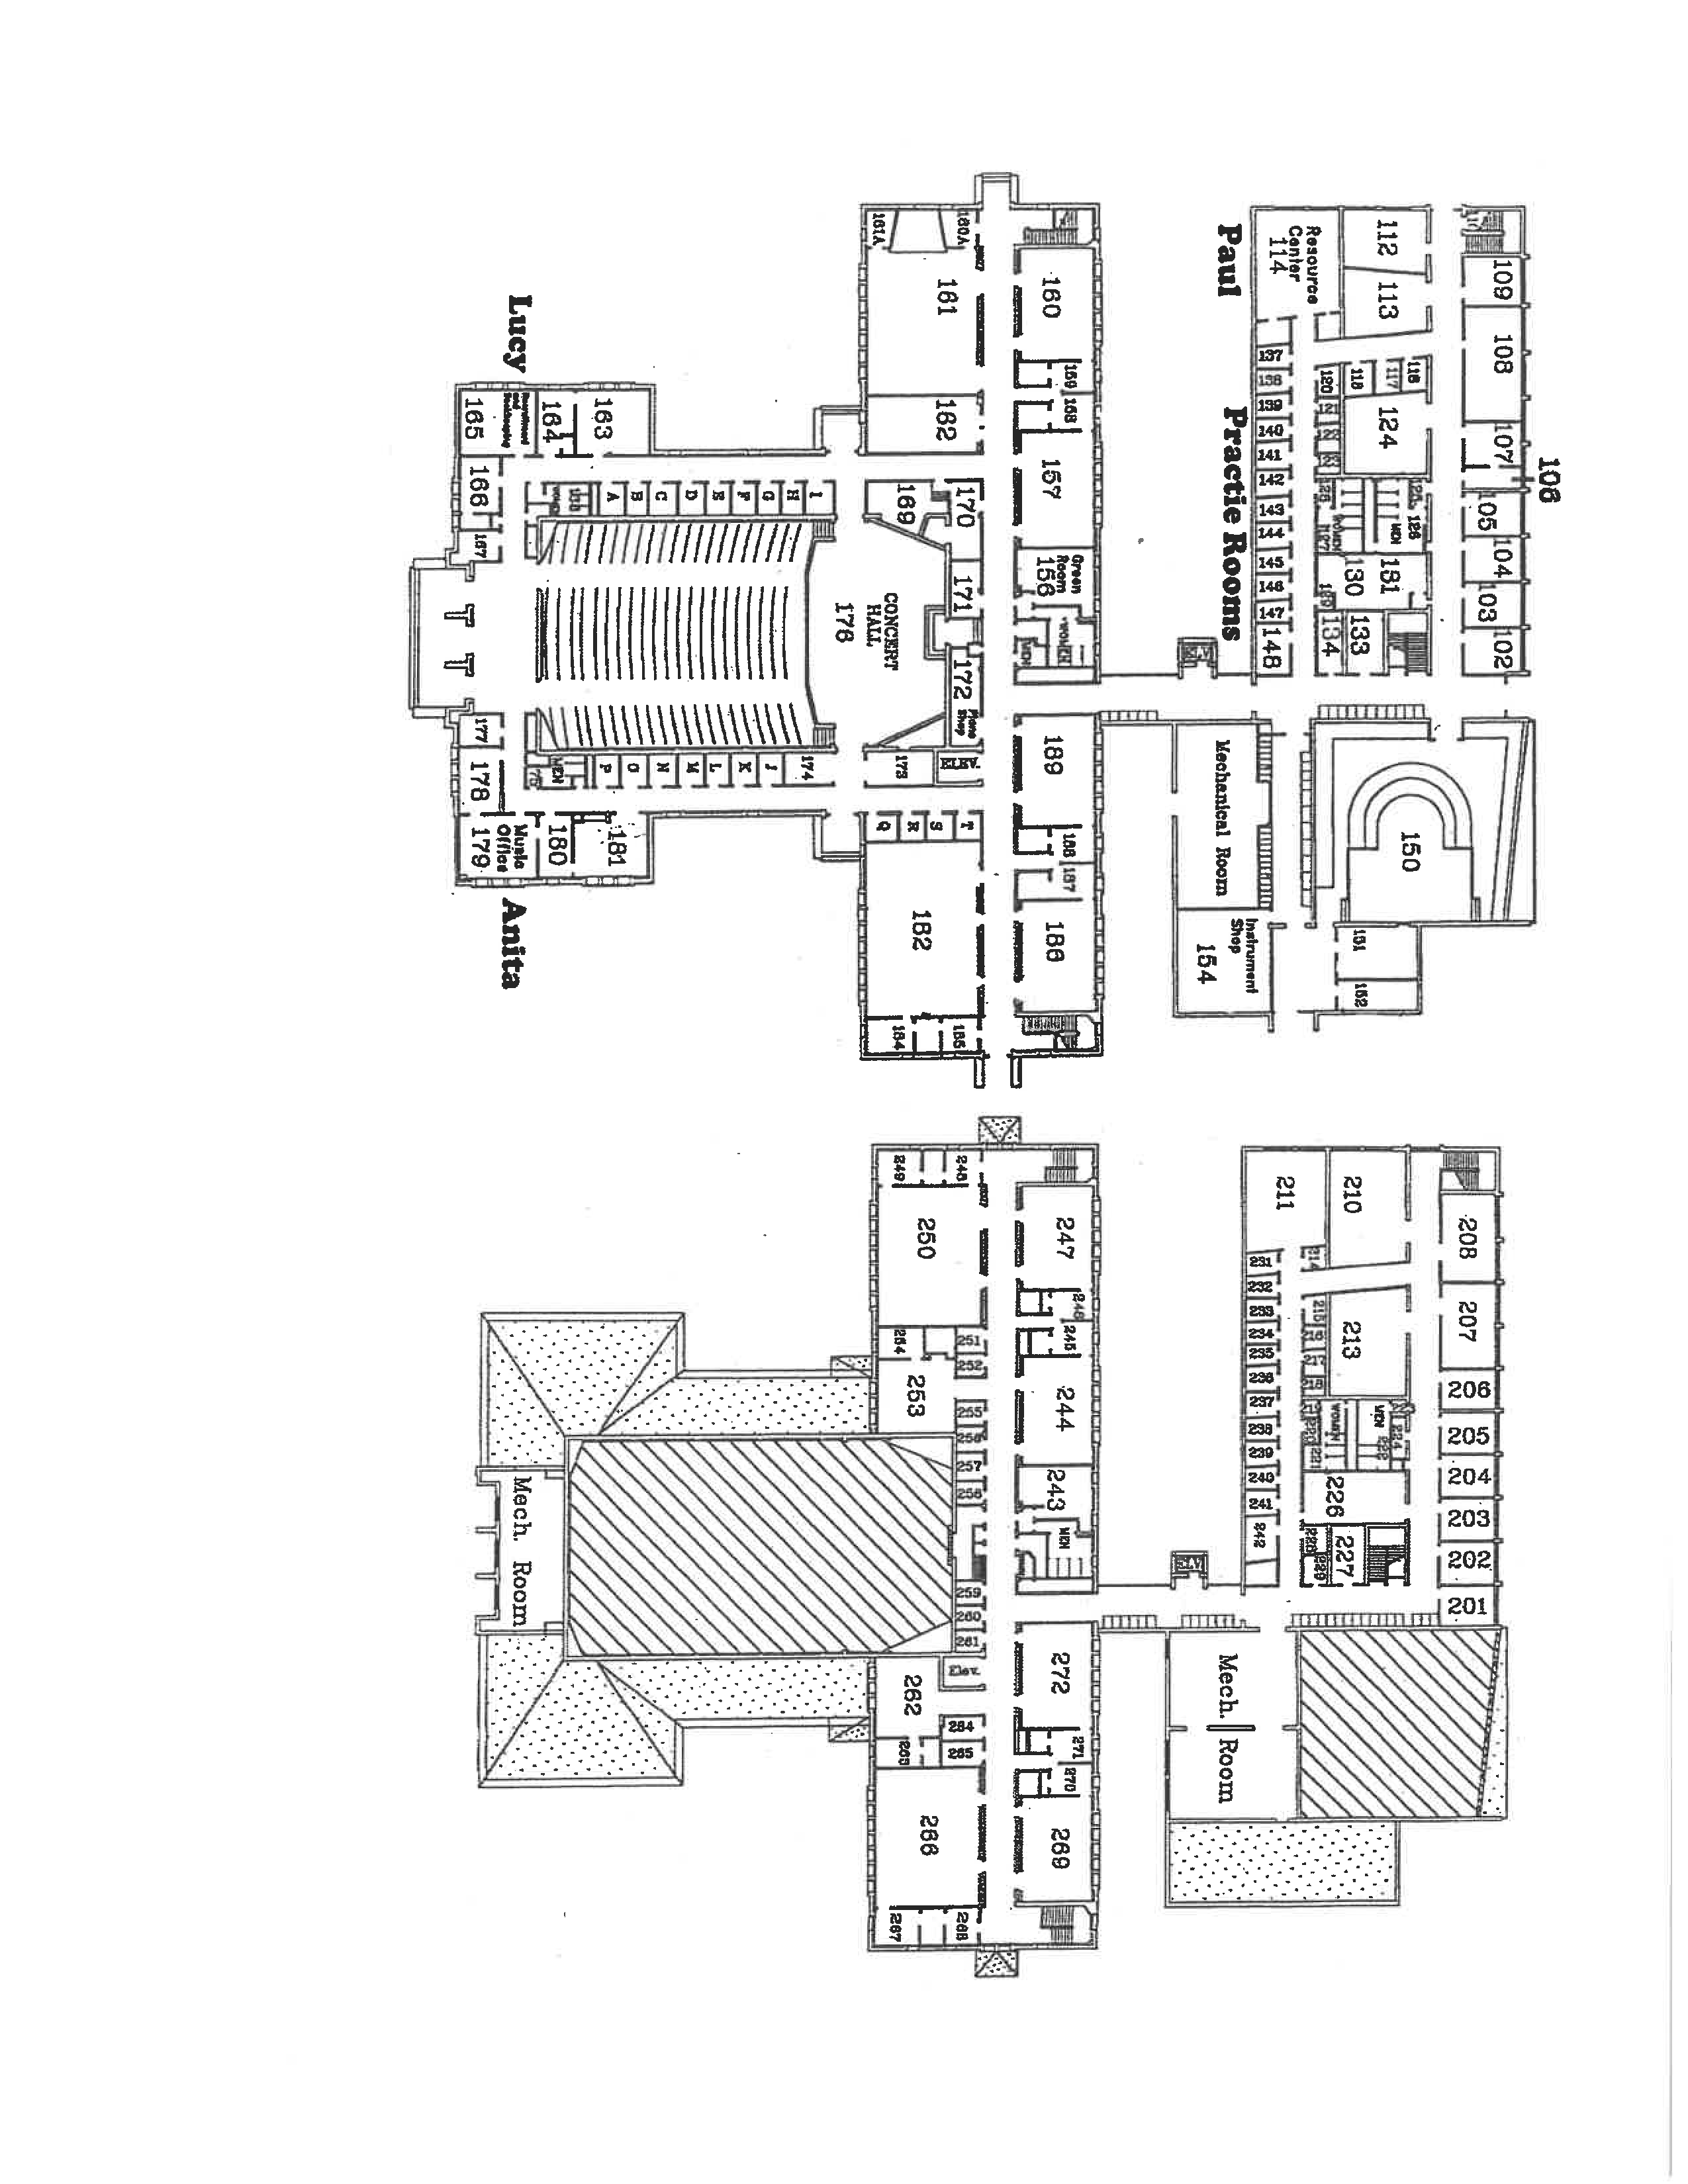 Map of the School of Music Department Building